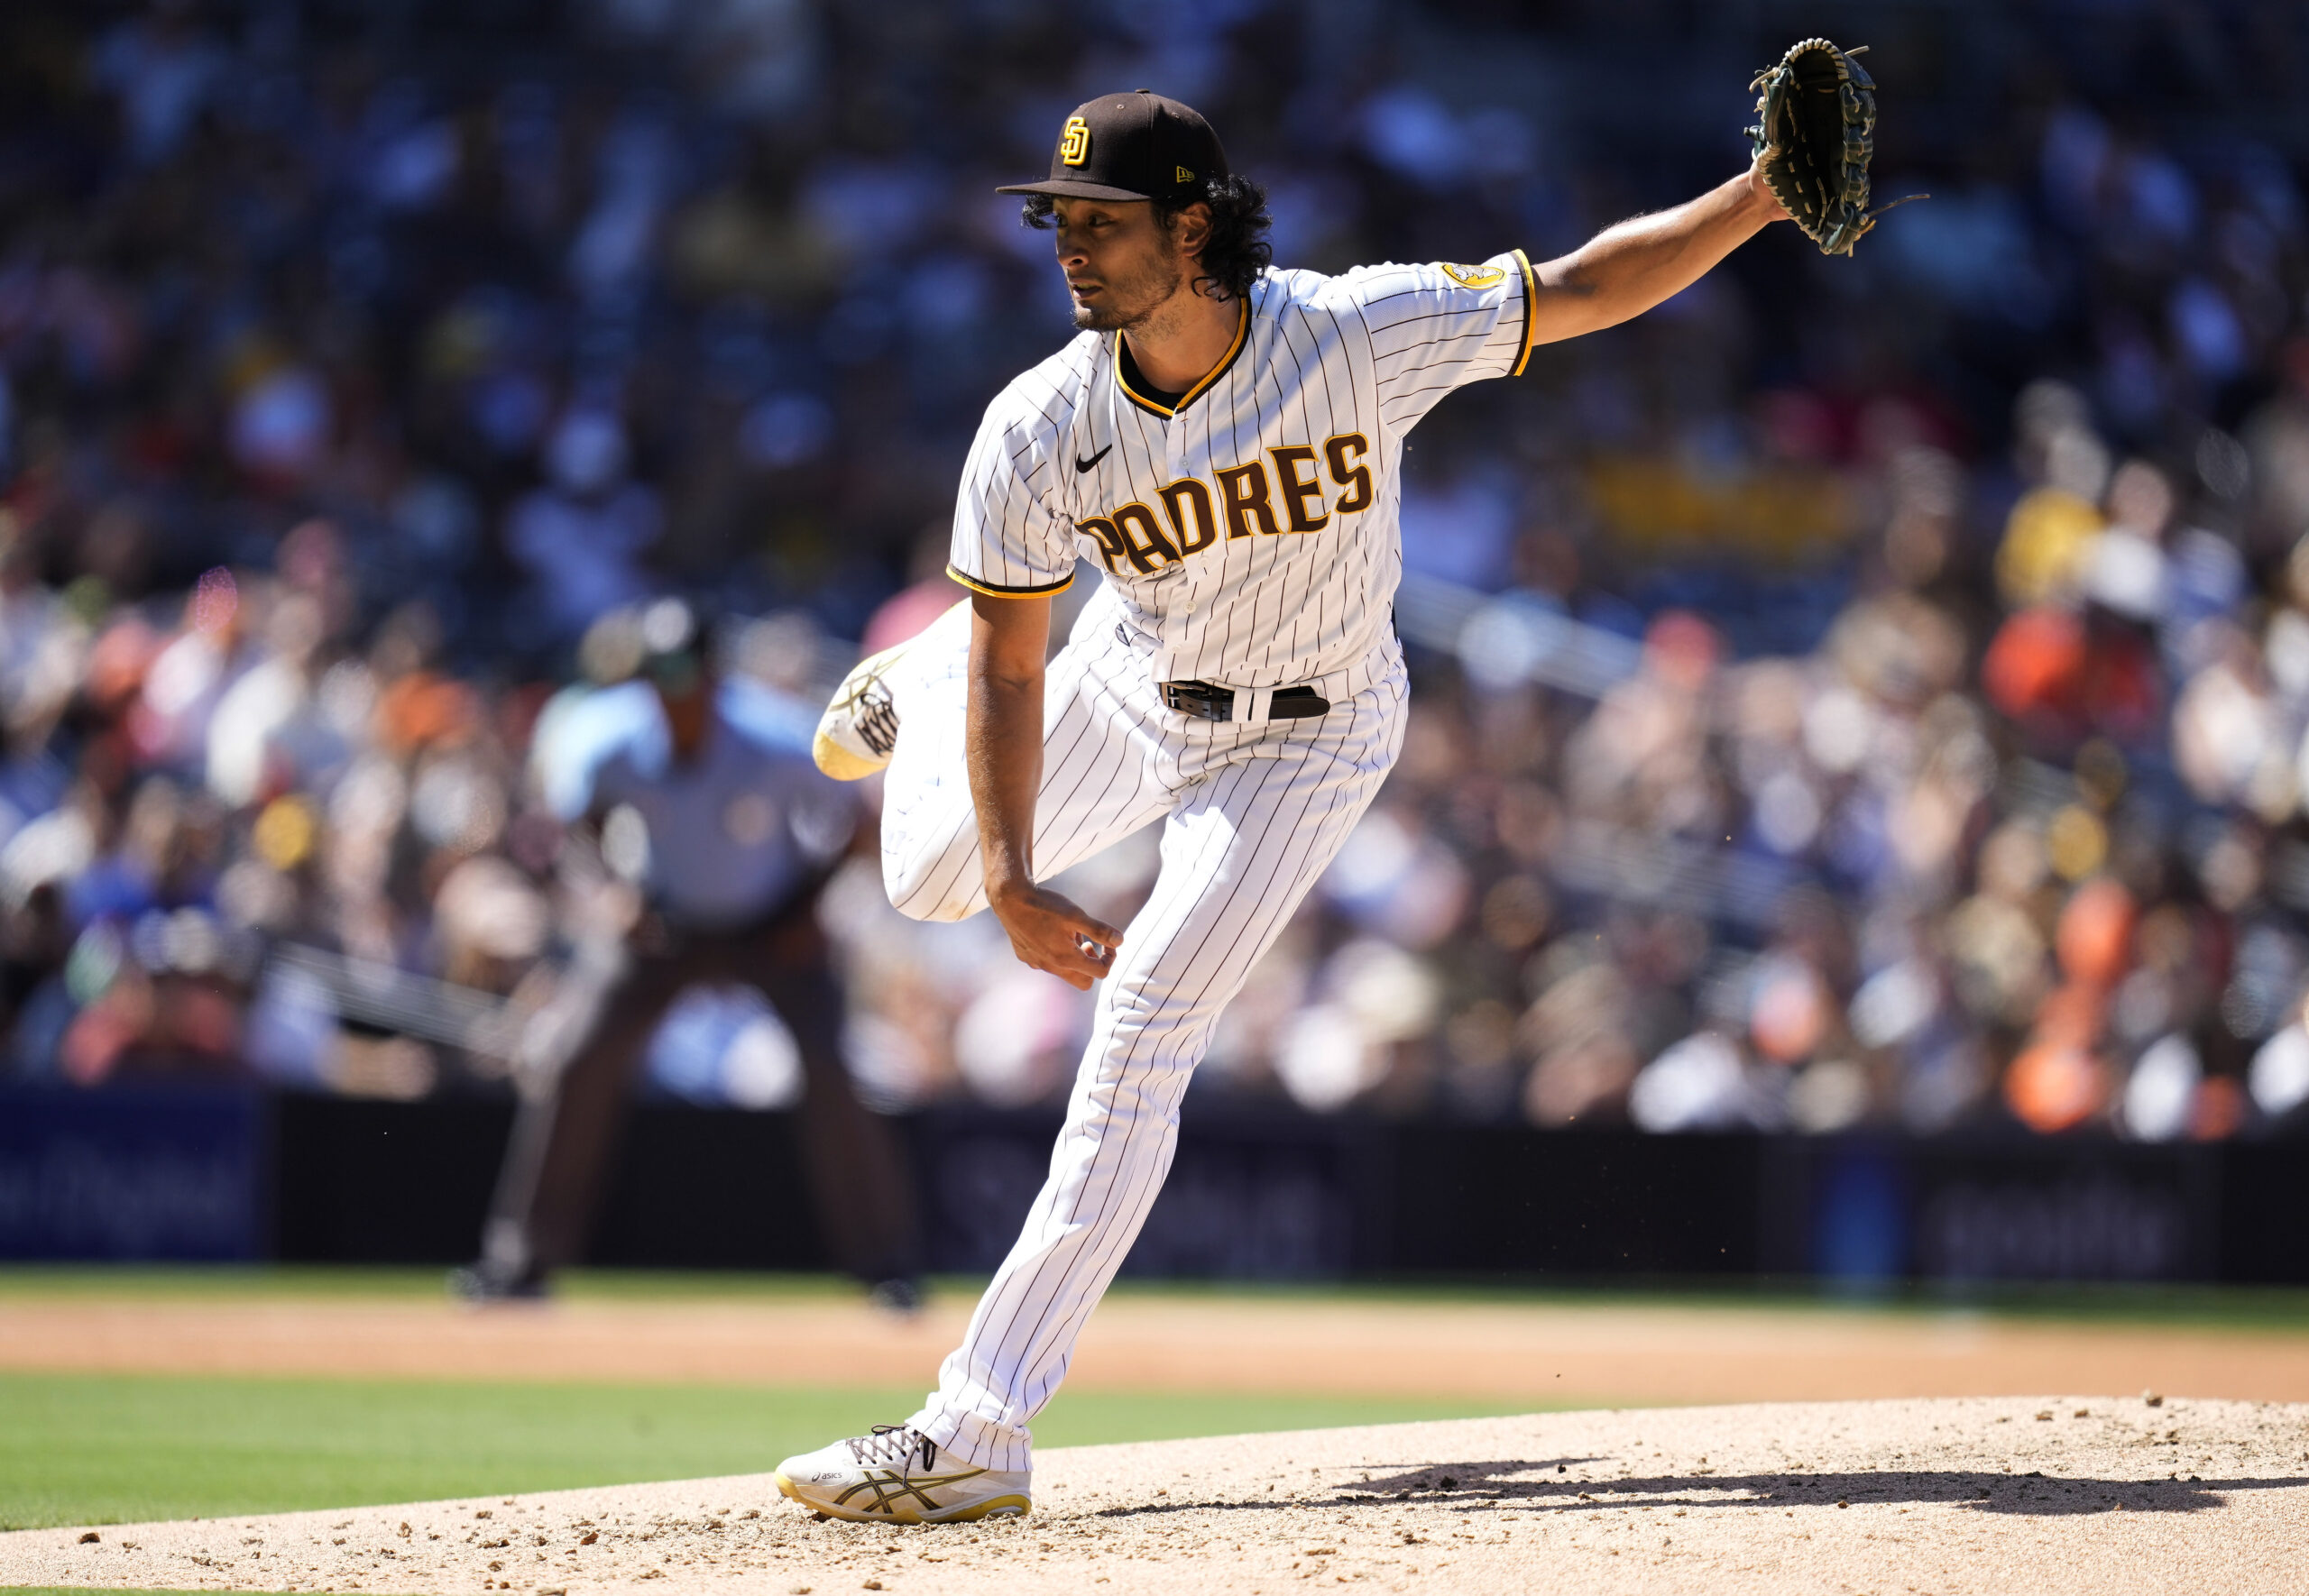 San Diego Padres pitcher Yu Darvish (11) pitches the ball during